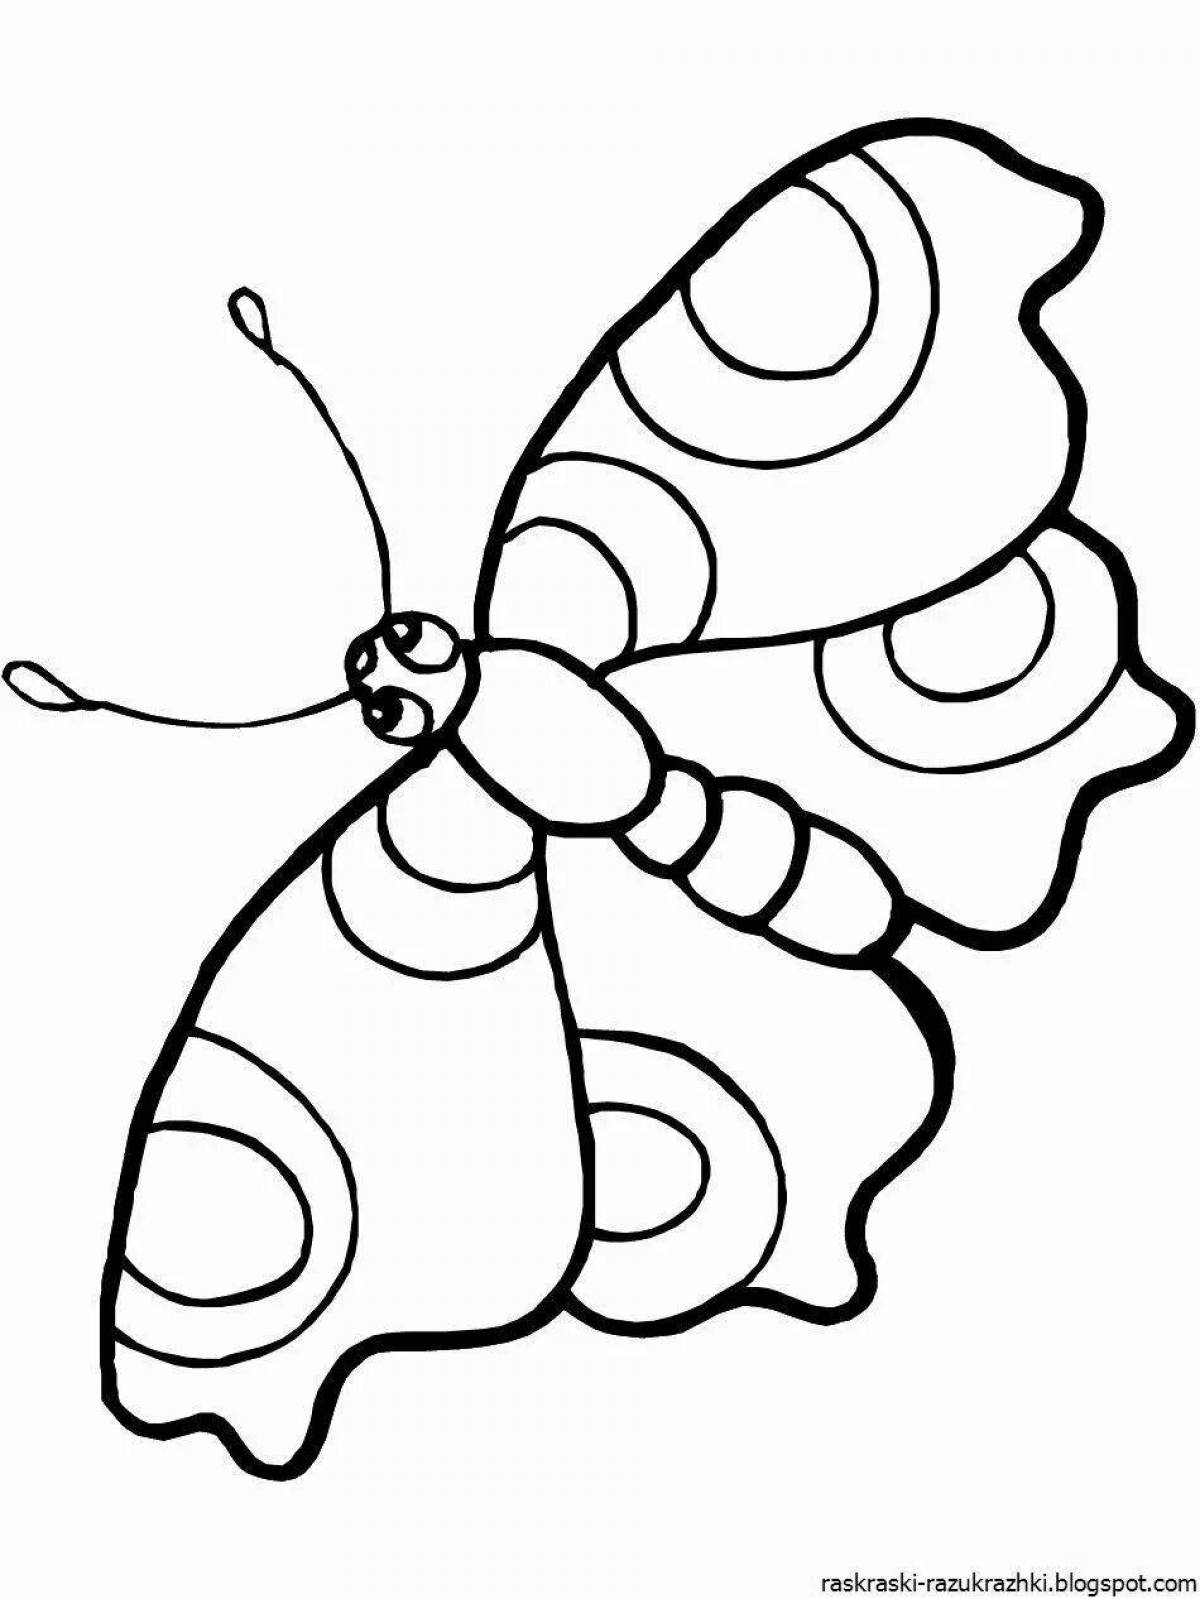 Fun coloring pages insects